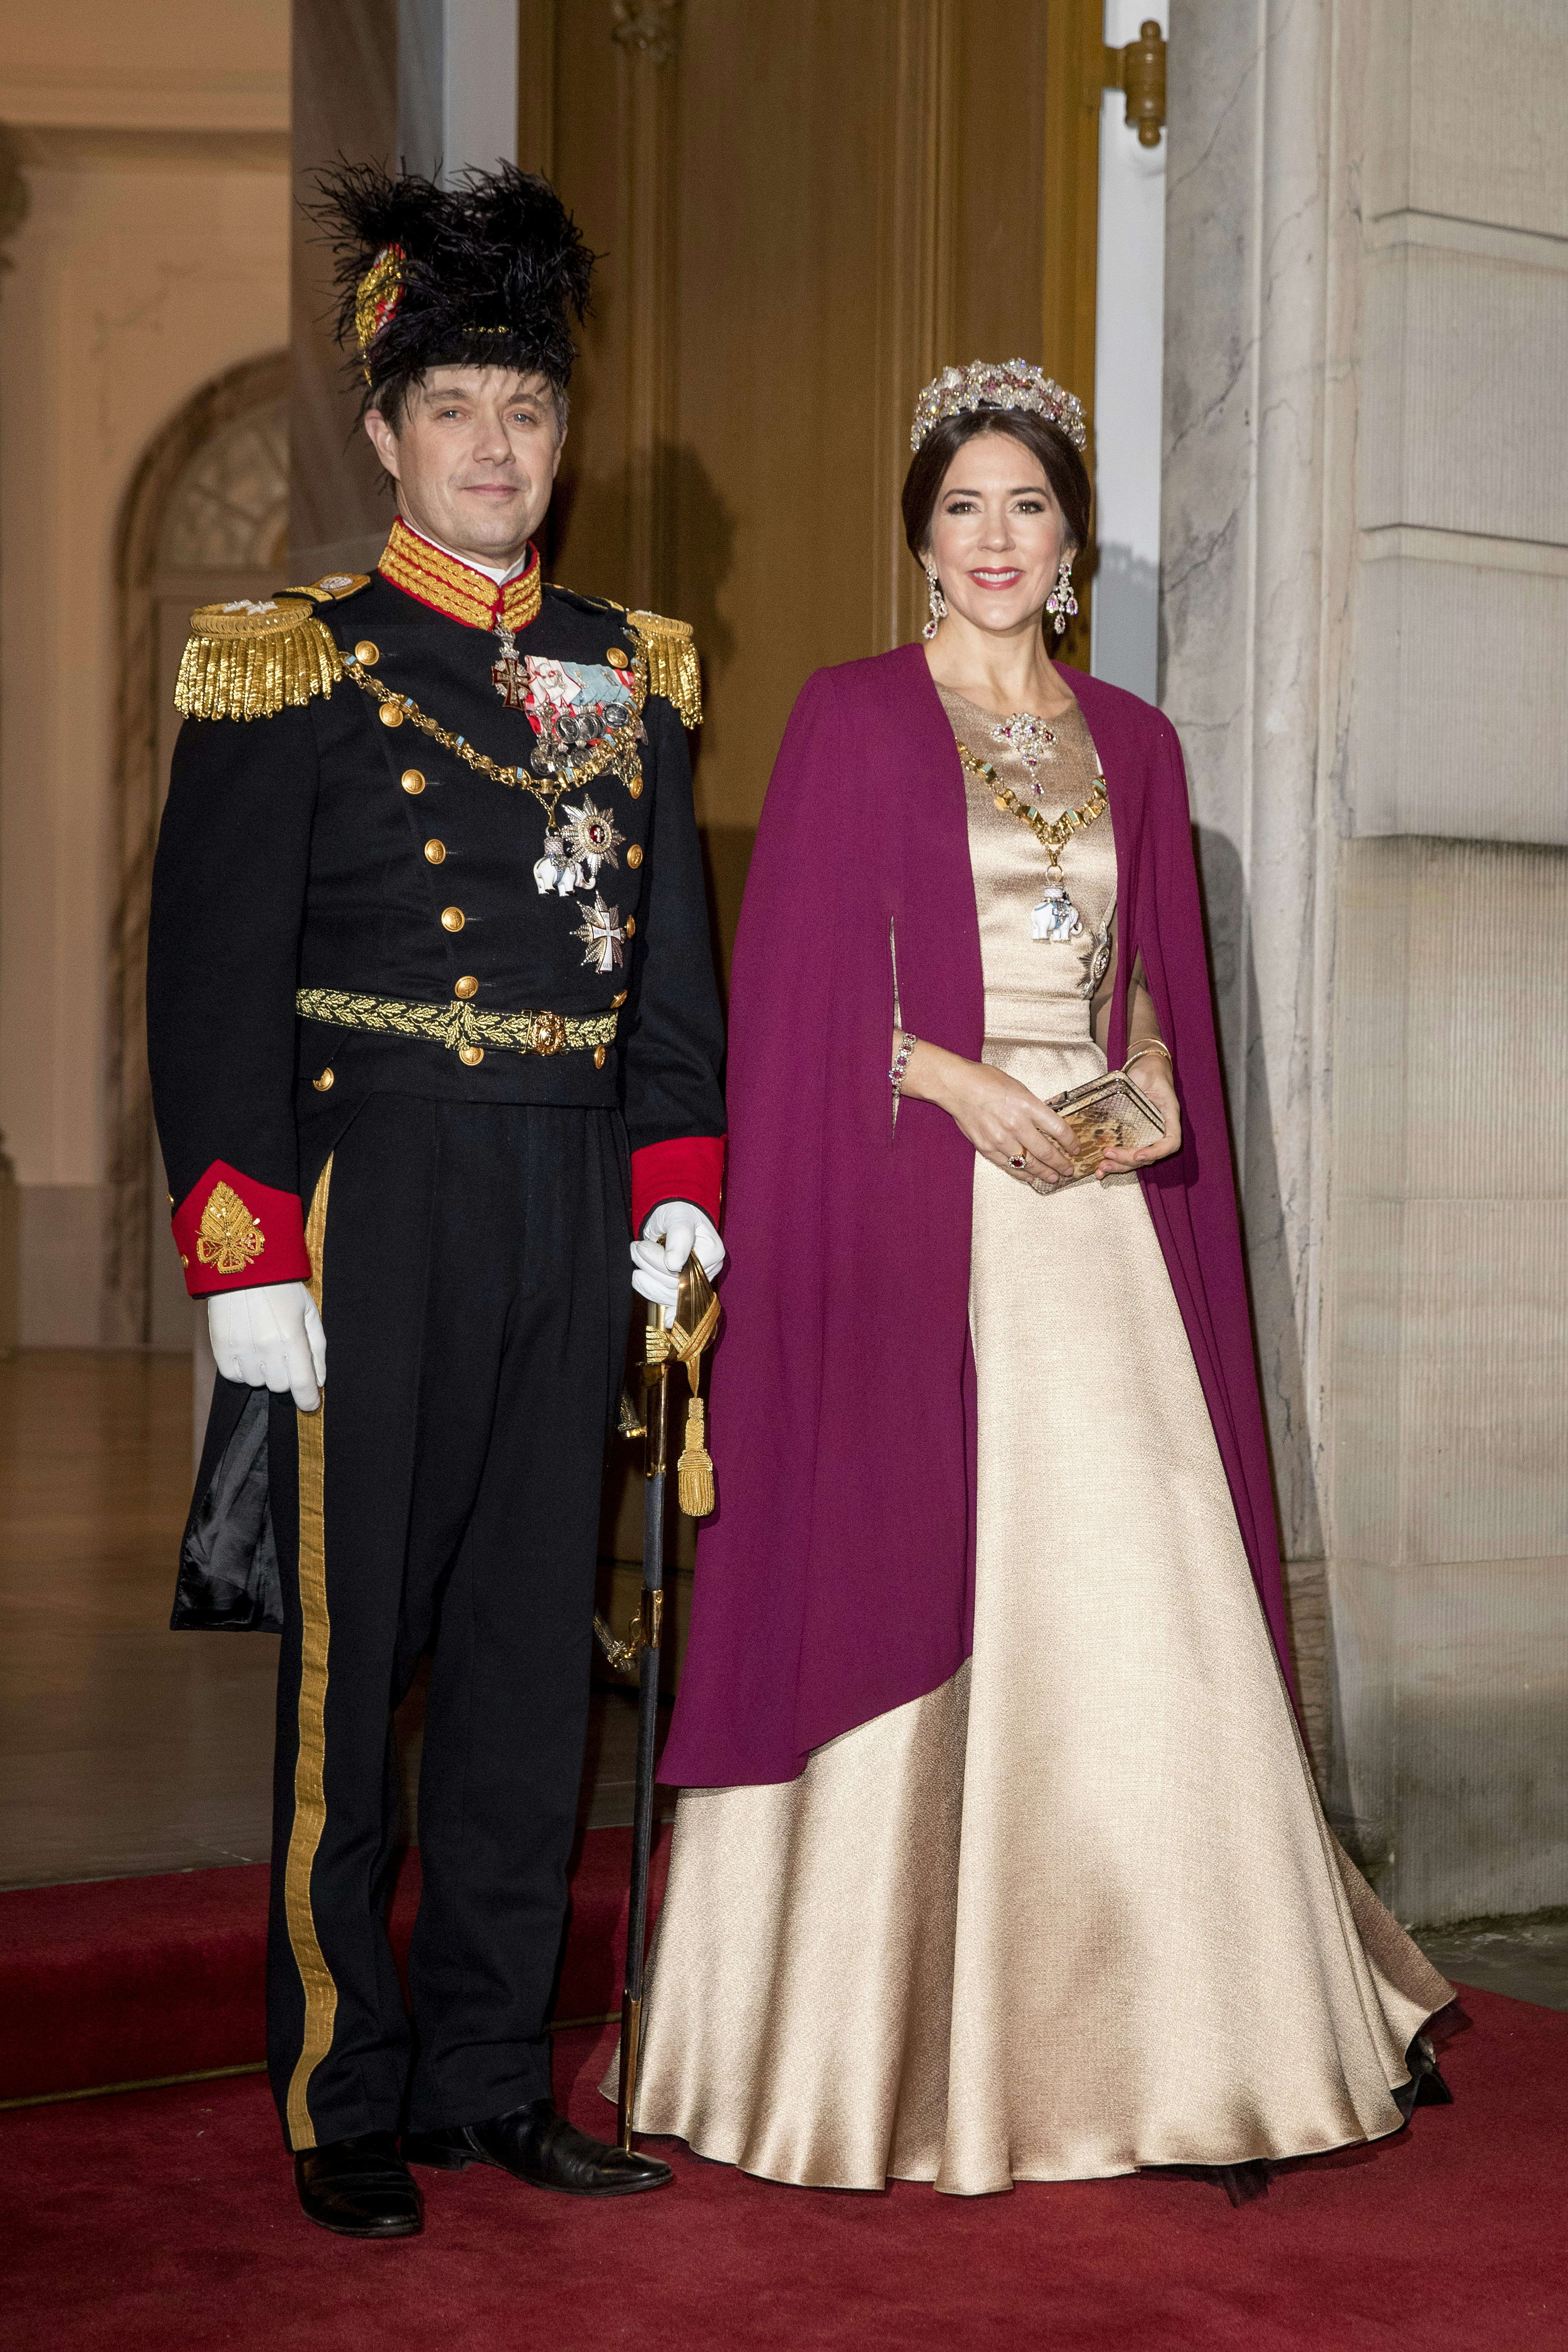 Crown Prince Frederik and Crown Princess Mary of Denmark attend the annual new year reception at Amalienborg Palace in Copenhagen, Denmark, 1 January 2017. / NETHERLANDS OUT POINT DE VUE OUT - NO WIRE SERVICE- Photo by: Patrick van Katwijk/picture-alliance/dpa/AP Images Kronprinsesse Mary kronprins Frederik